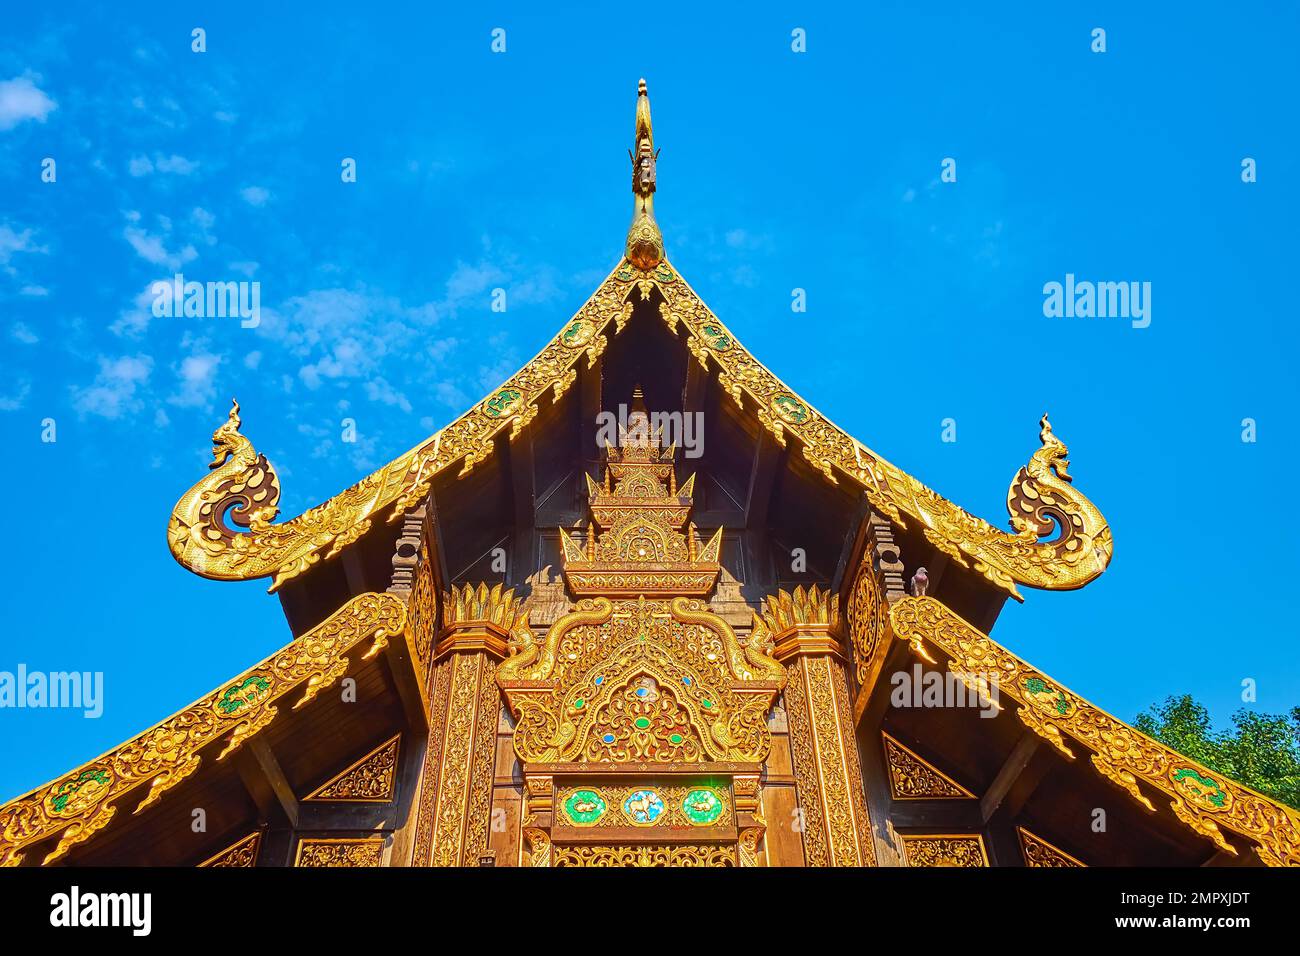 The carved, mirror mosaic and gilt decors of the multi-tired (pyathat) roof of Wat Inthakhin Sadue Muang, Chiang Mai, Thailand Stock Photo